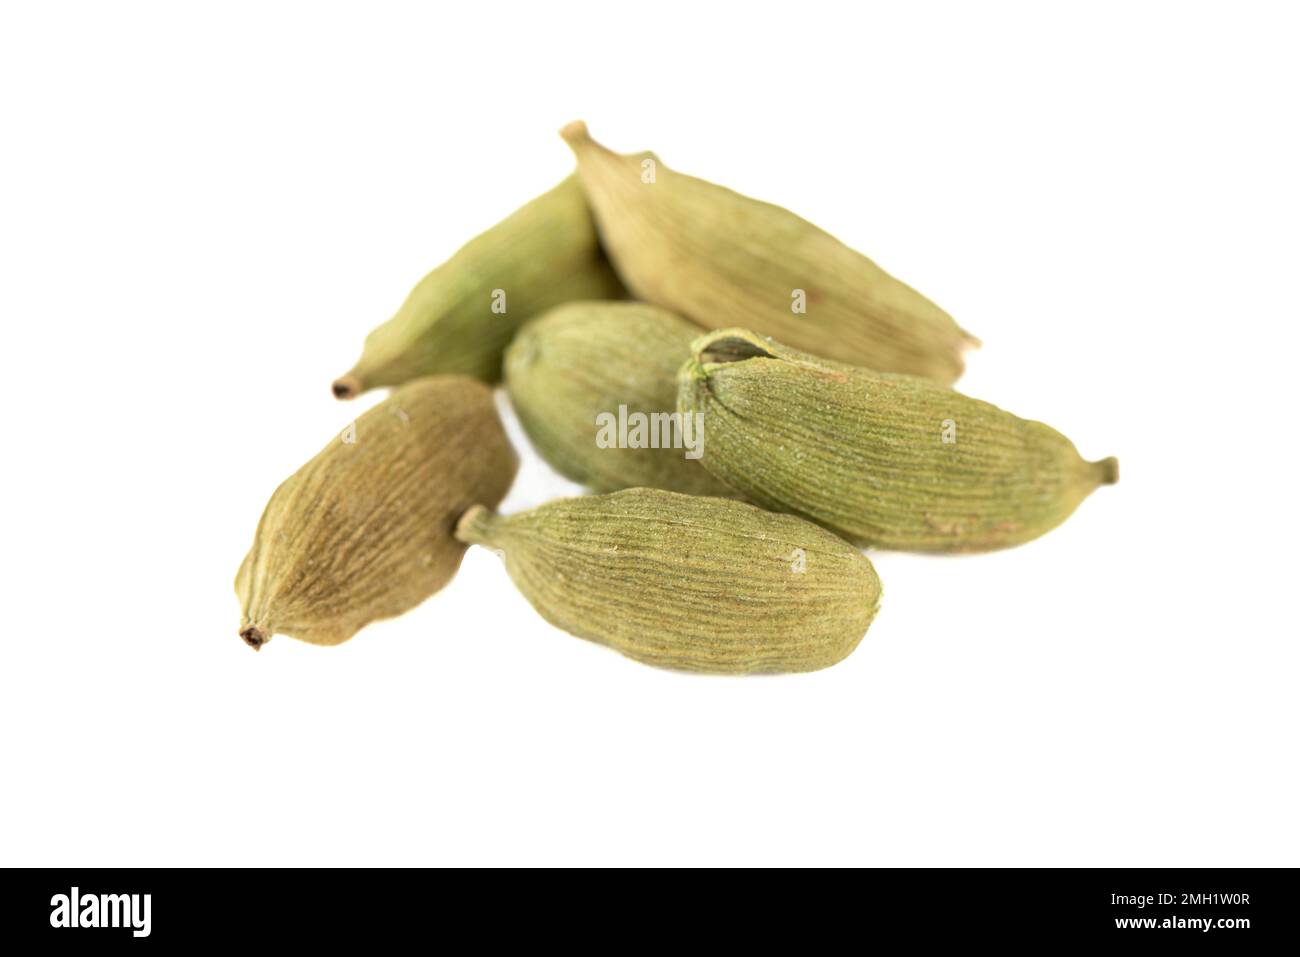 Soft focus on green cardamom pods on white background. The focus is on the front pods, the pods in the background are blurred. Stock Photo